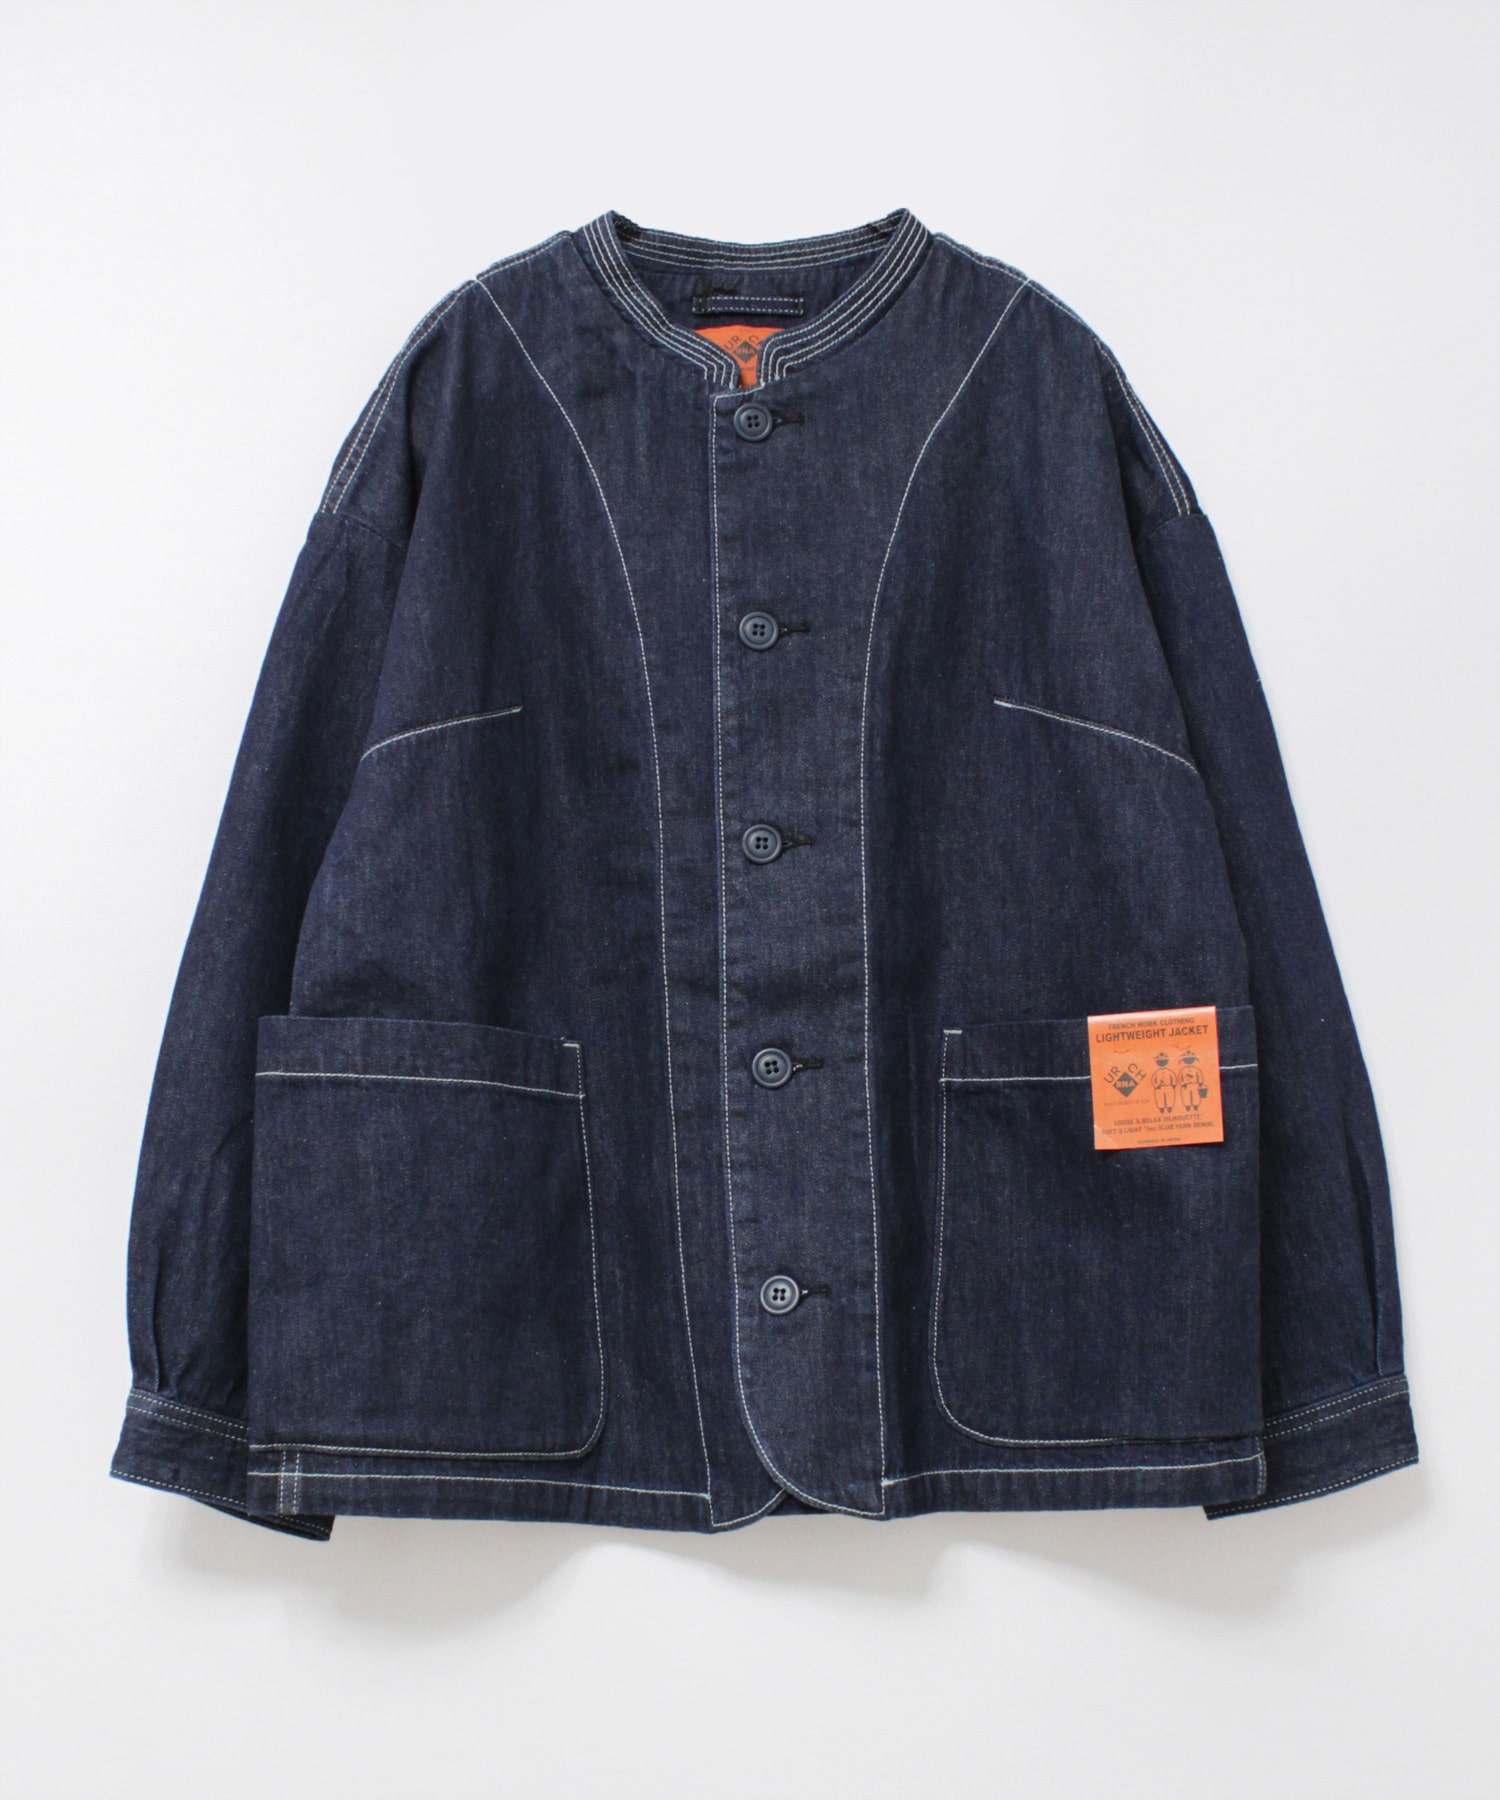 OUTER&KNIT FAIR - RNA ONLINE STORE | アールエヌエー公式通販